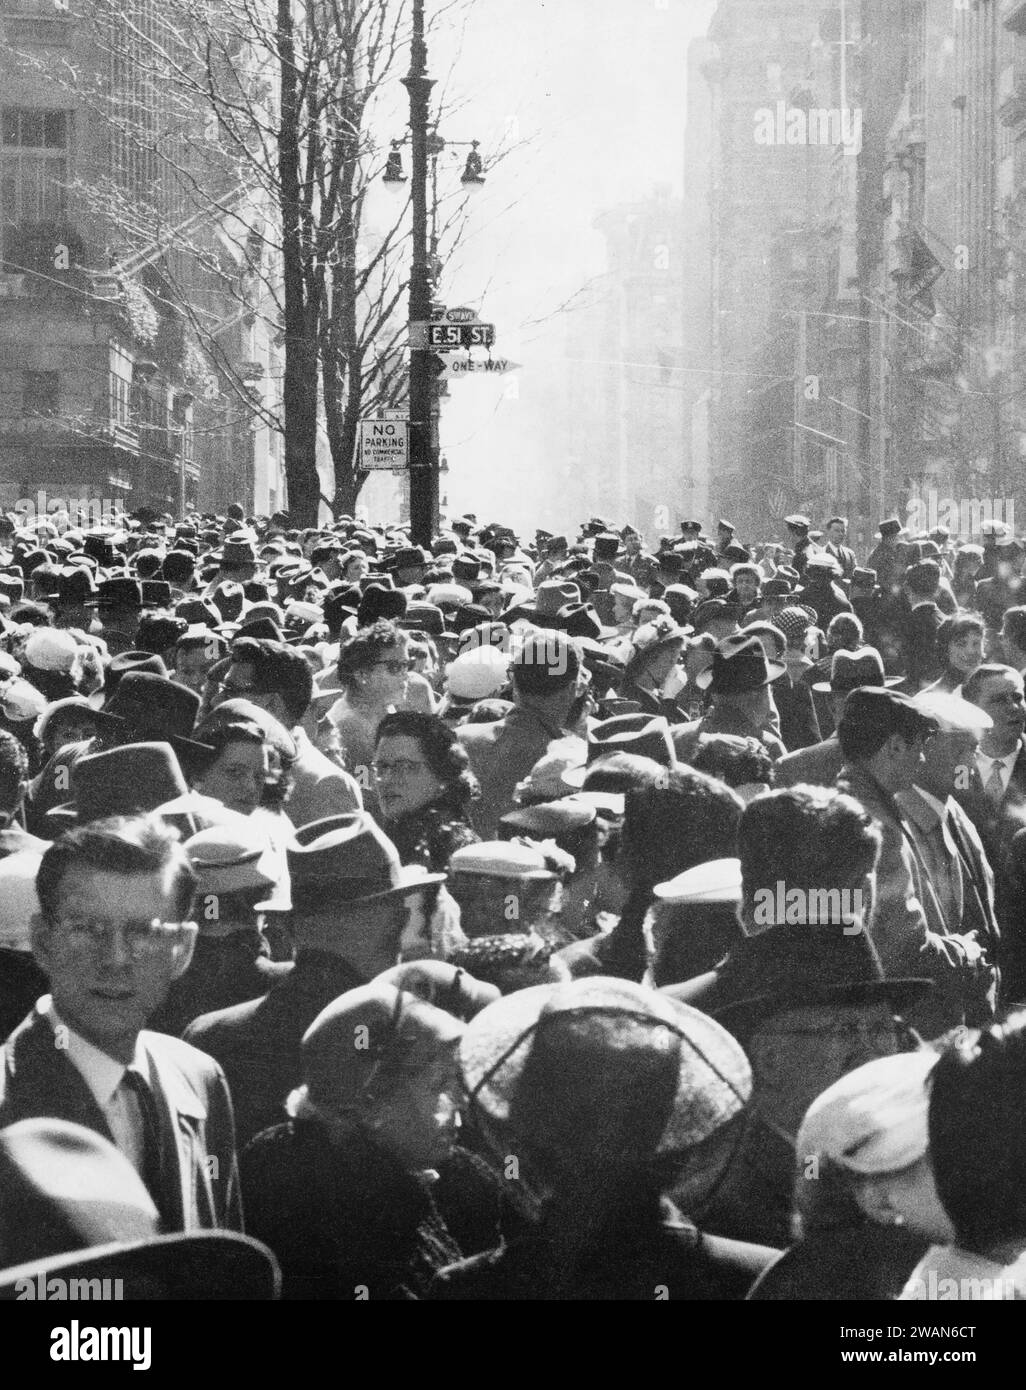 Large crowd street scene, East 51st Street, New York City, New York, USA, Angelo Rizzuto, Anthony Angel Collection, April 1956 Stock Photo